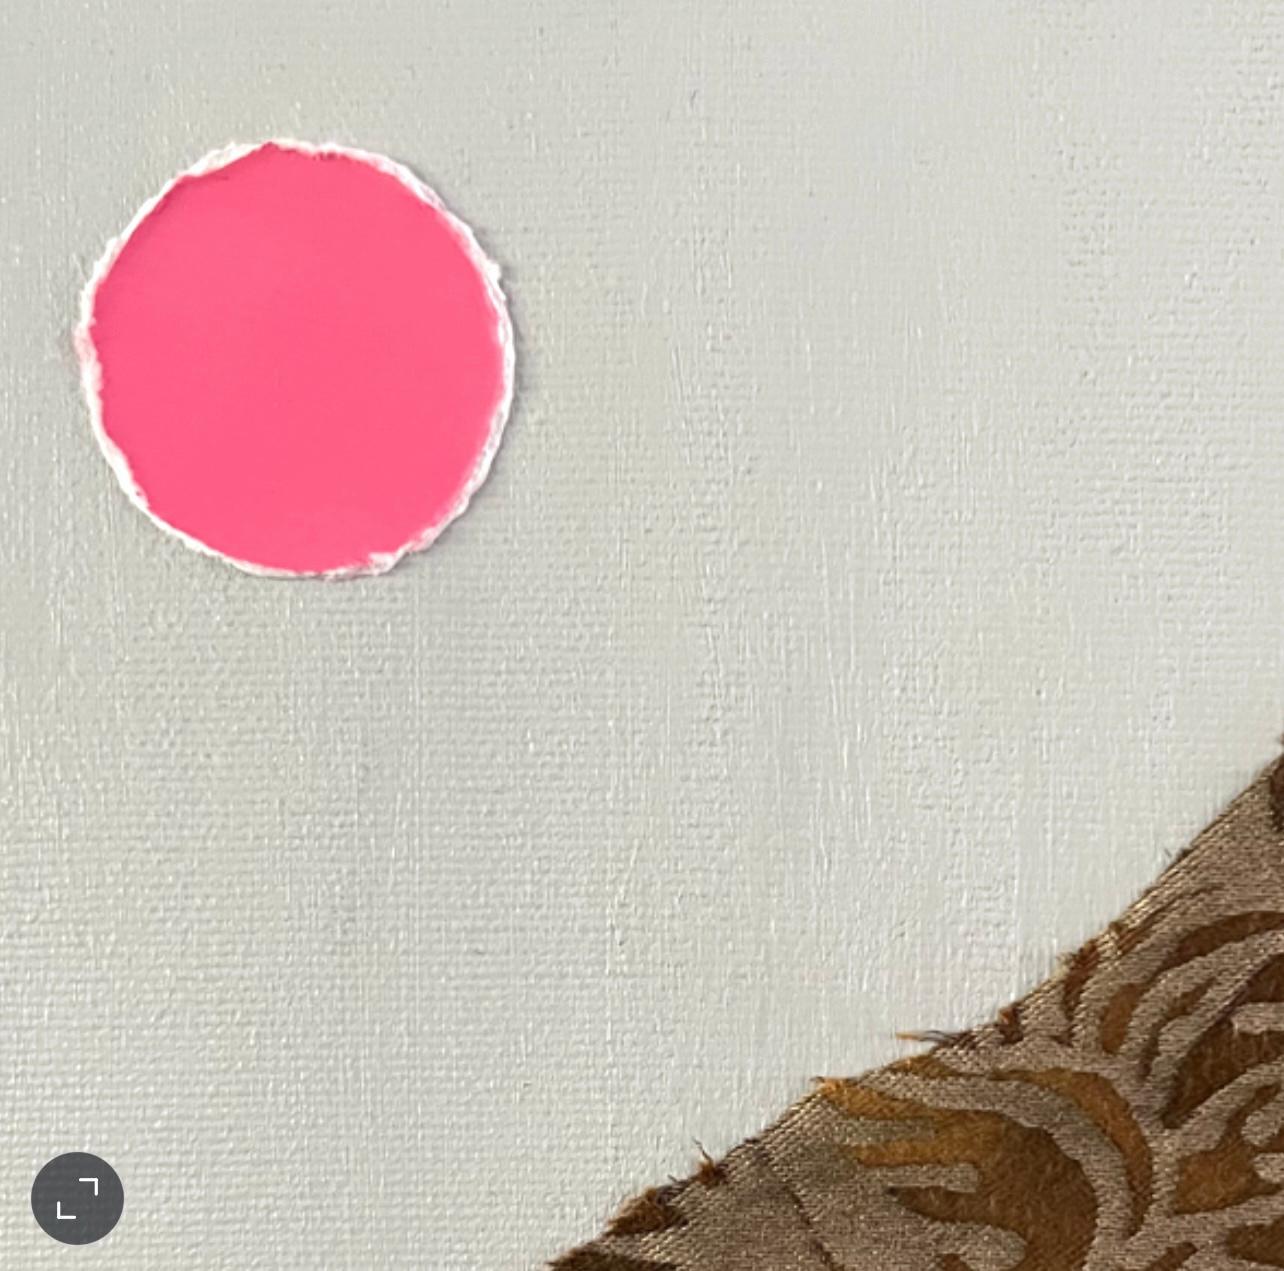 This is the second in a series of intimate paintings exploring colour combinations using fragments of Fortuny textiles. Through the use of paint, paper and fabric, the simplified compositions echo minimal landscapes with the sun claiming the